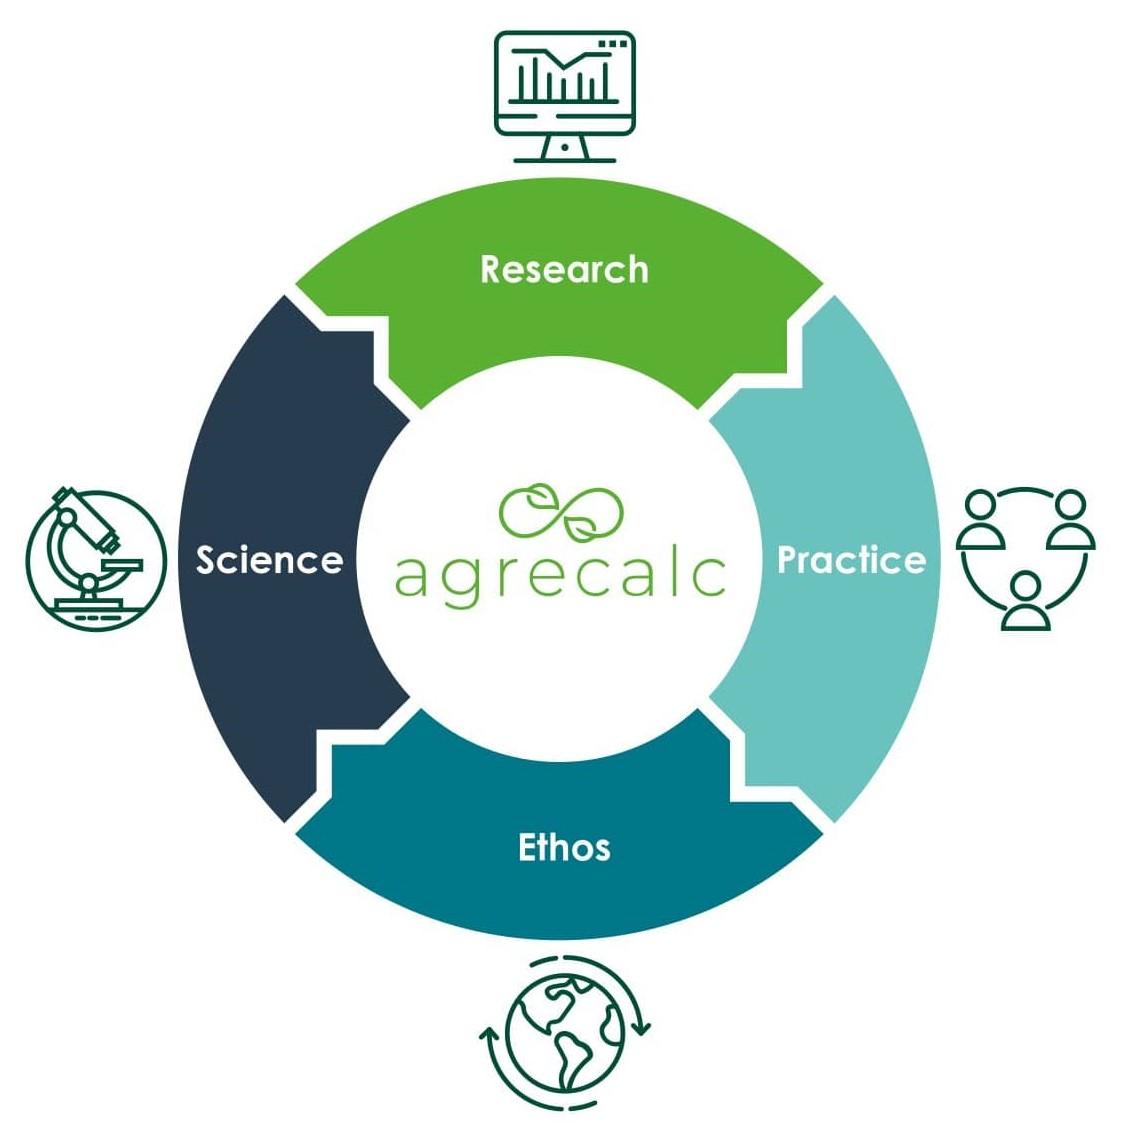 agrecalc circle that shows how we combine science, research, practice and ethos